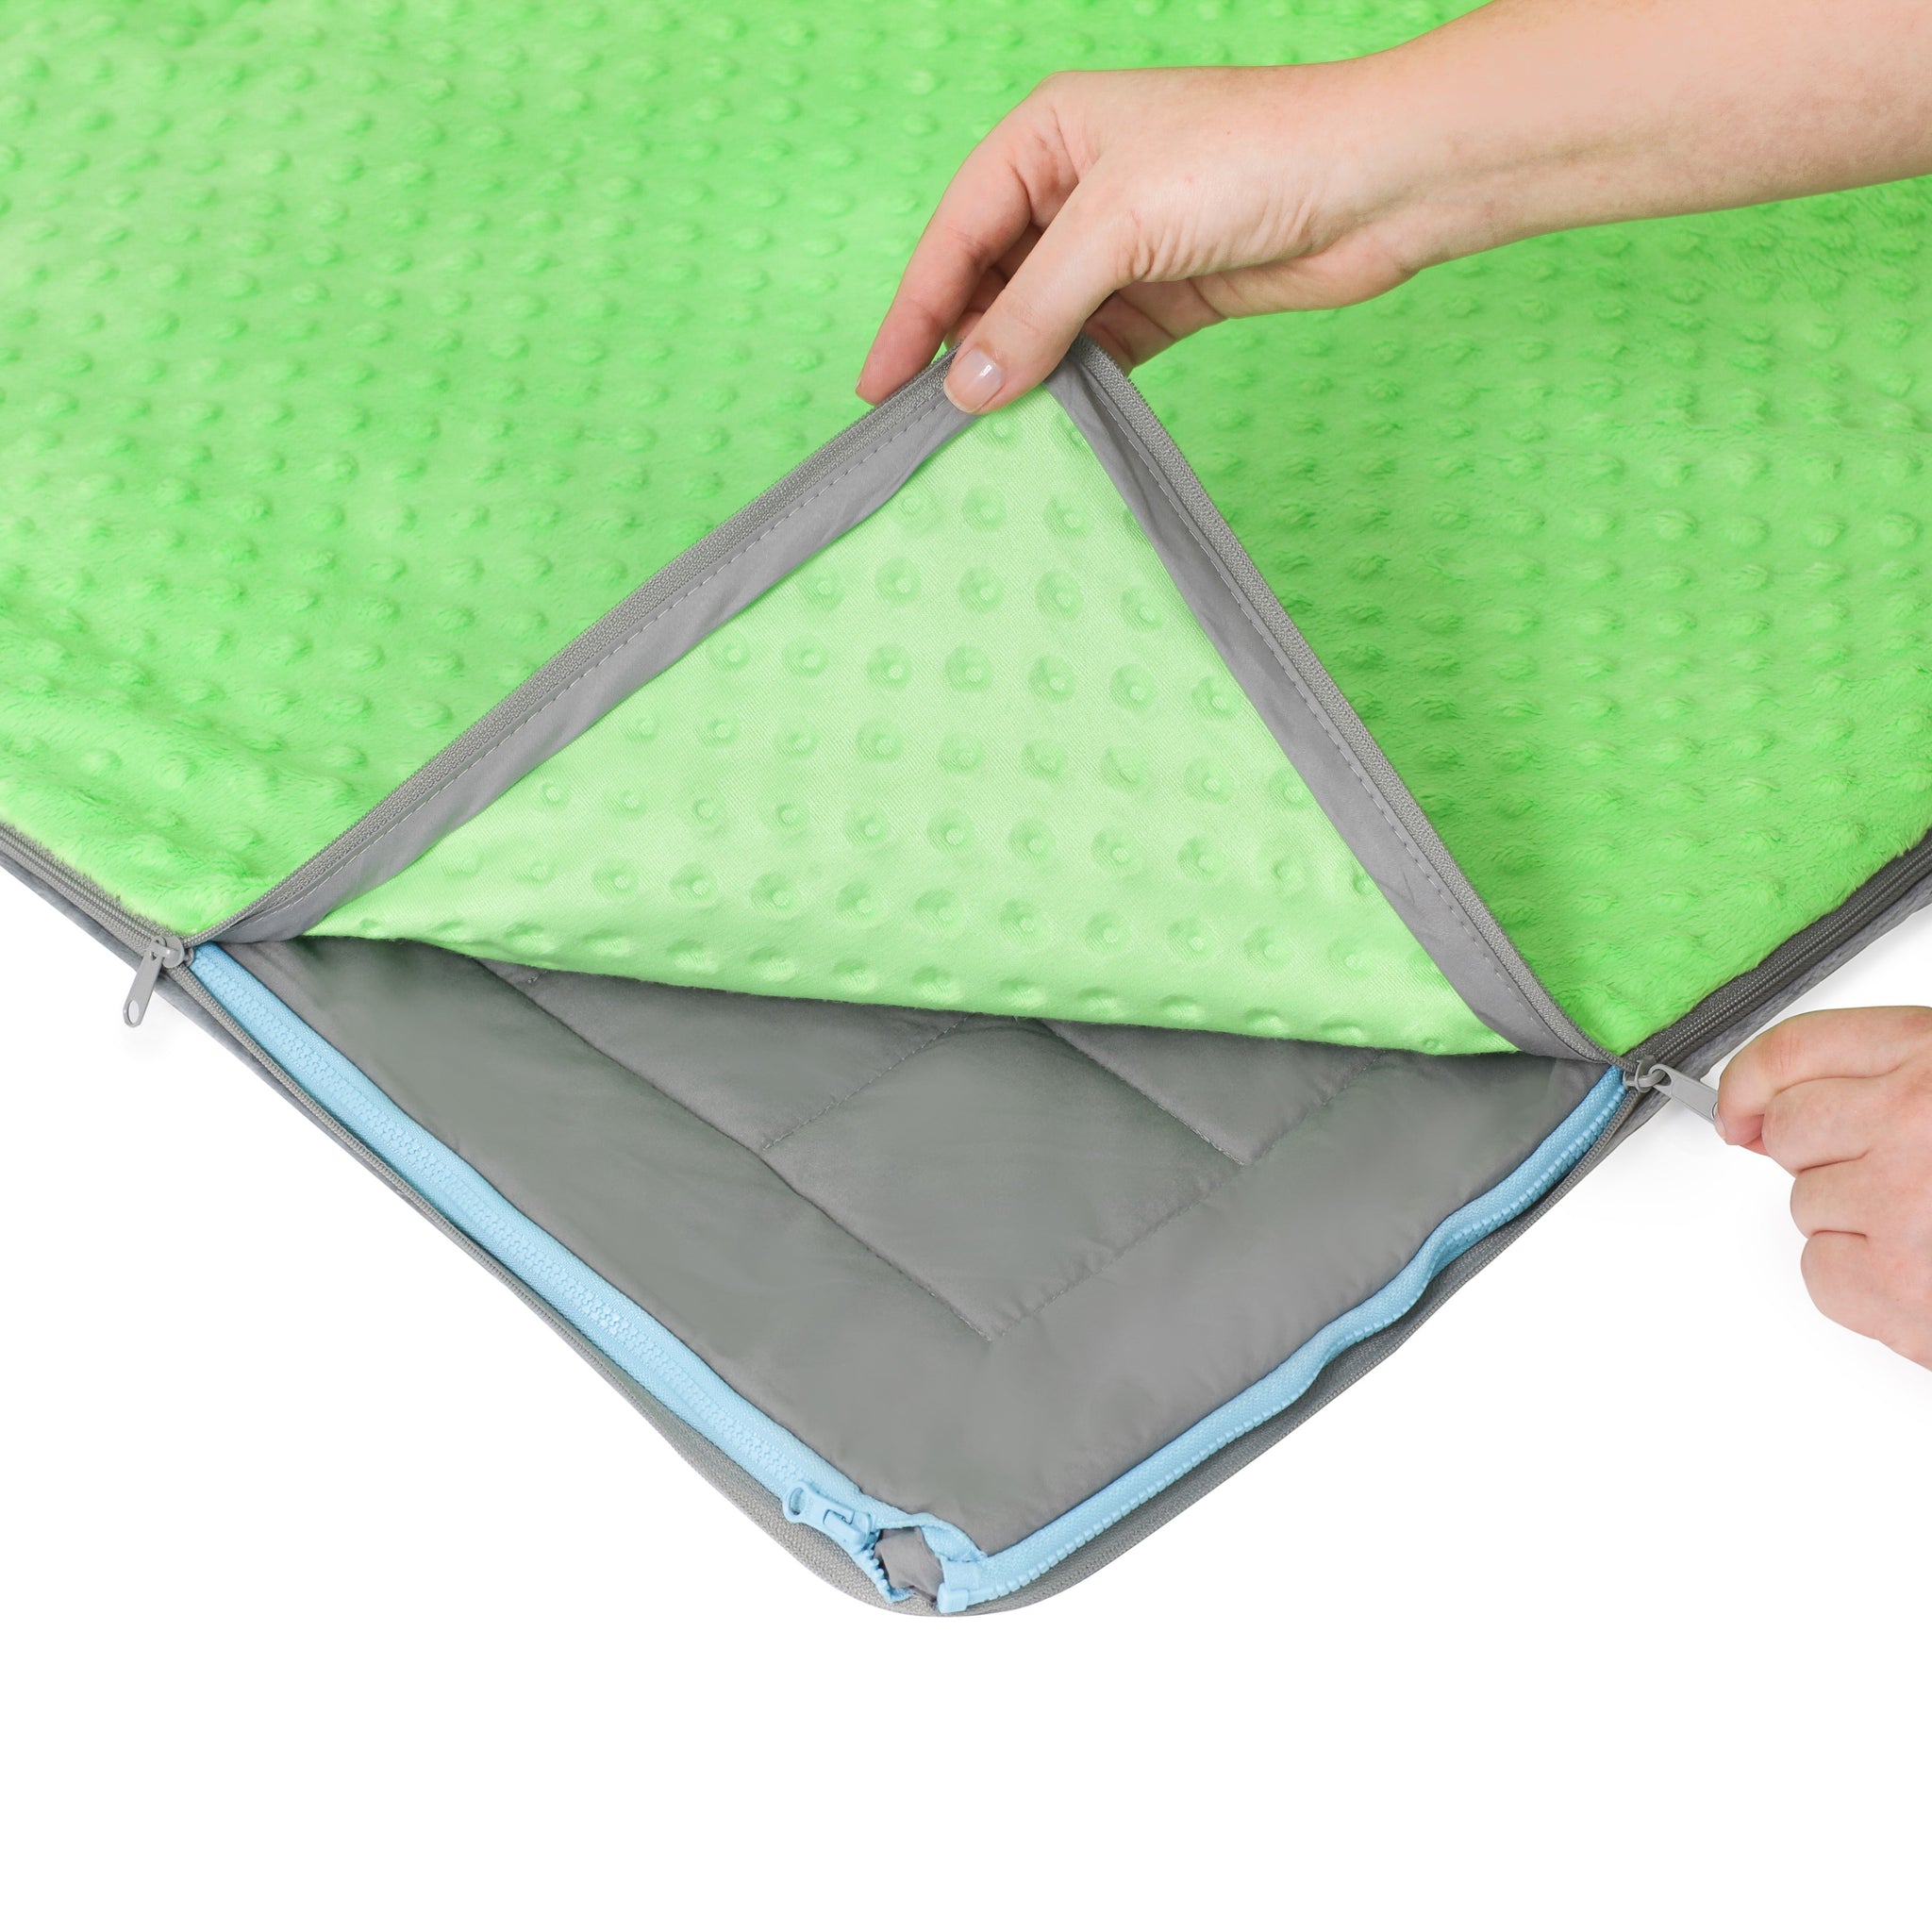 10 lb Weighted Blanket in Lime Green with Patented Zipper System